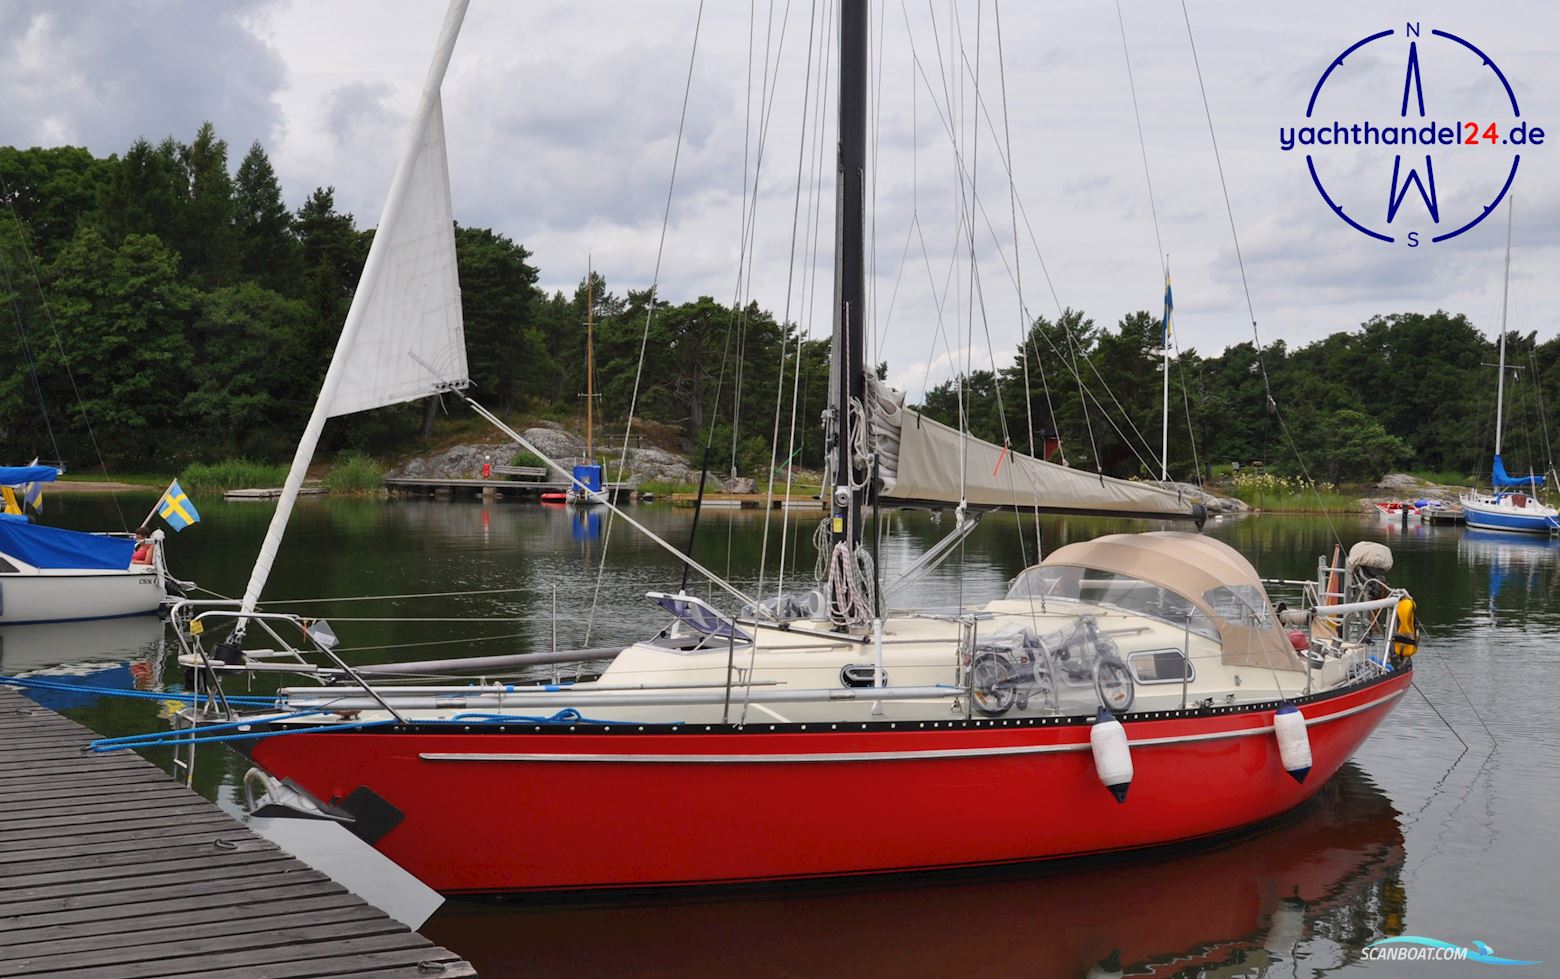 Asmus Hanseat 70 B II Sailing boat 1976, with Indenor - Peugeot Xdp 4.88 engine, Germany